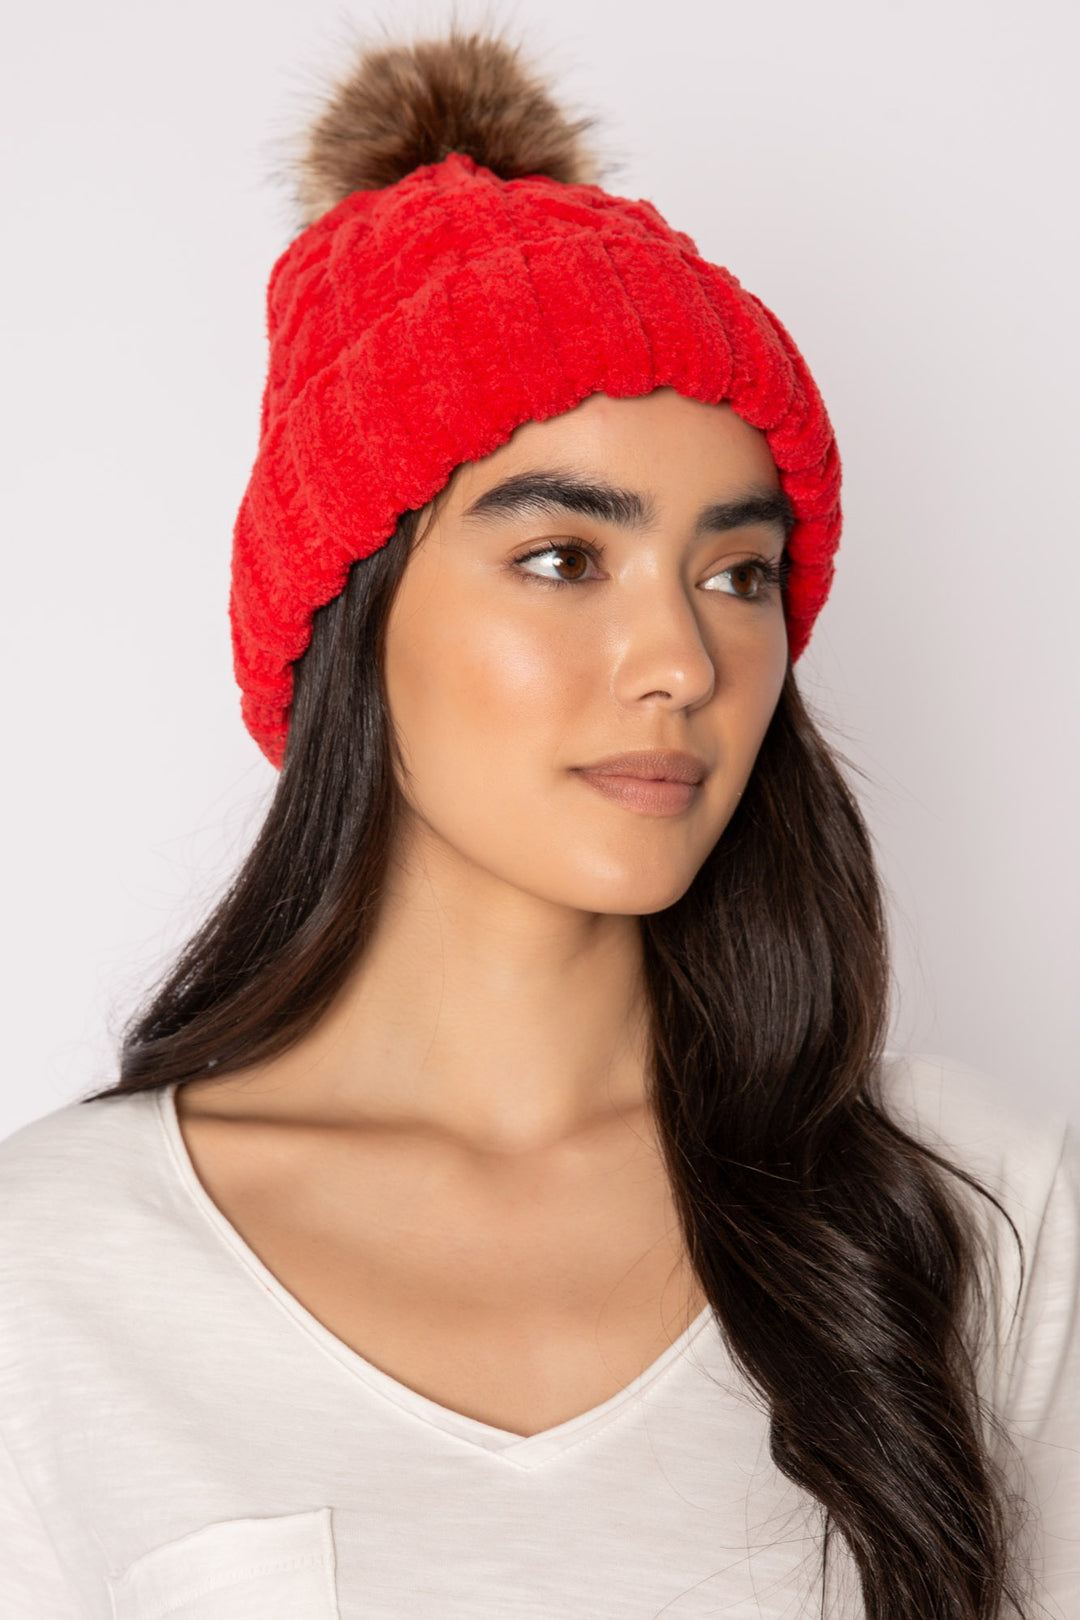 Beanie hat in red chenille knit cable pattern. Tan faux fur pom-pom on top. (7257677955172)